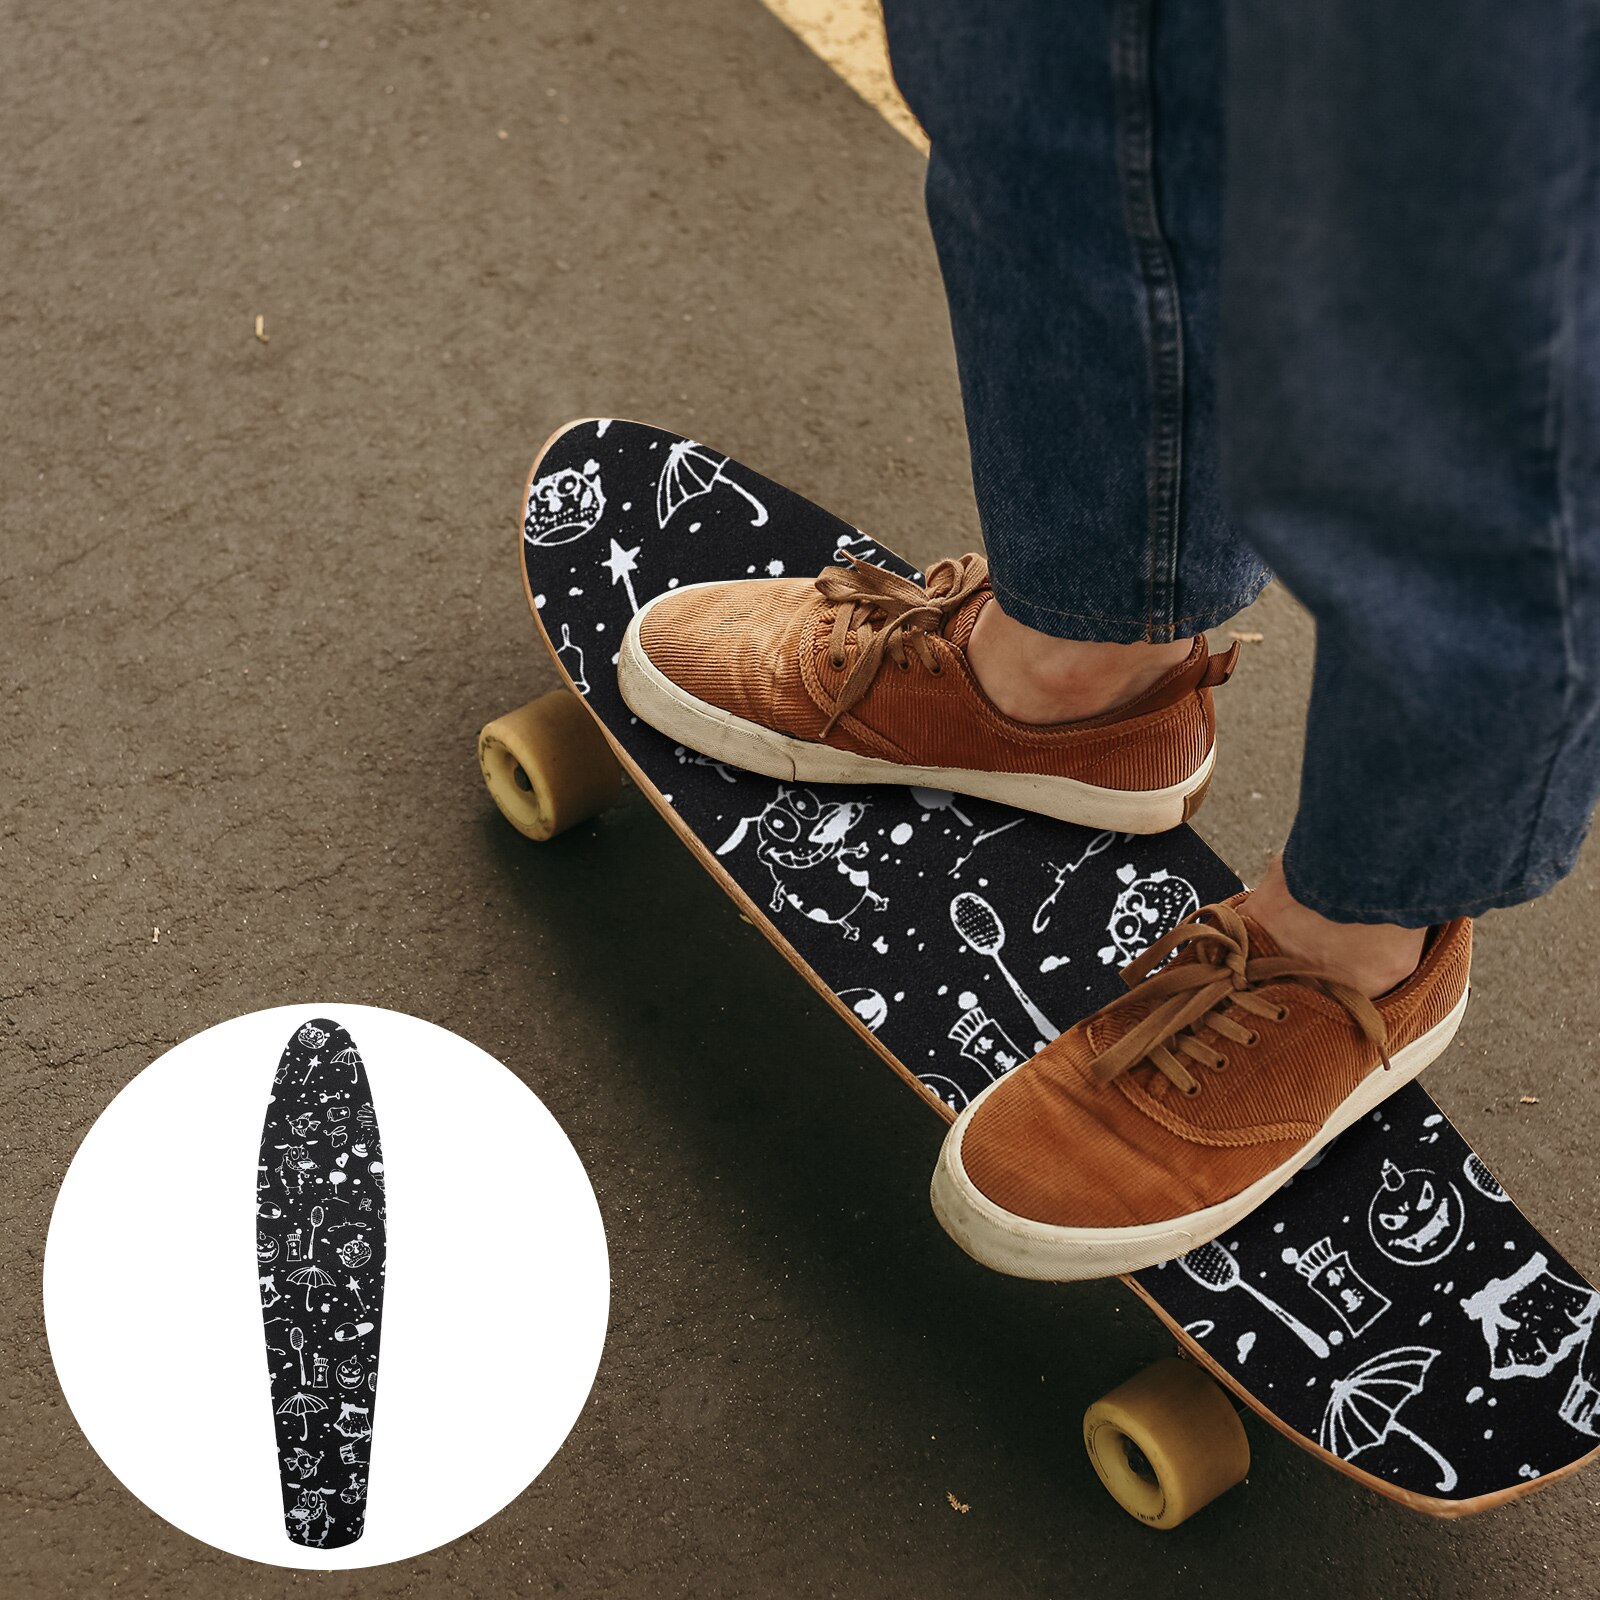 LV Grip Tape for skateboard., Sports Equipment, PMDs, E-Scooters